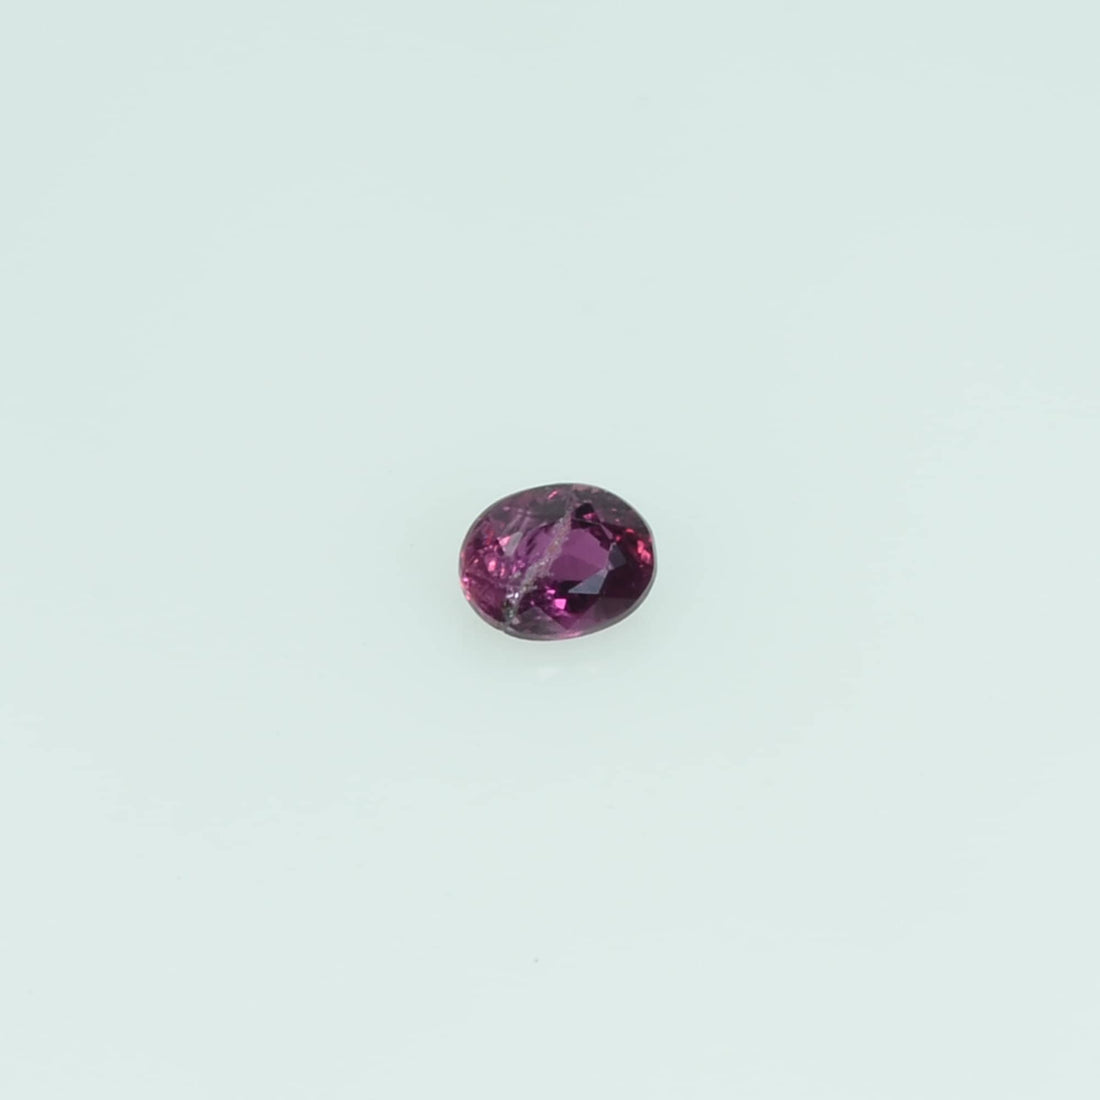 0.14 cts Natural Thai Ruby Loose Gemstone Oval Cut